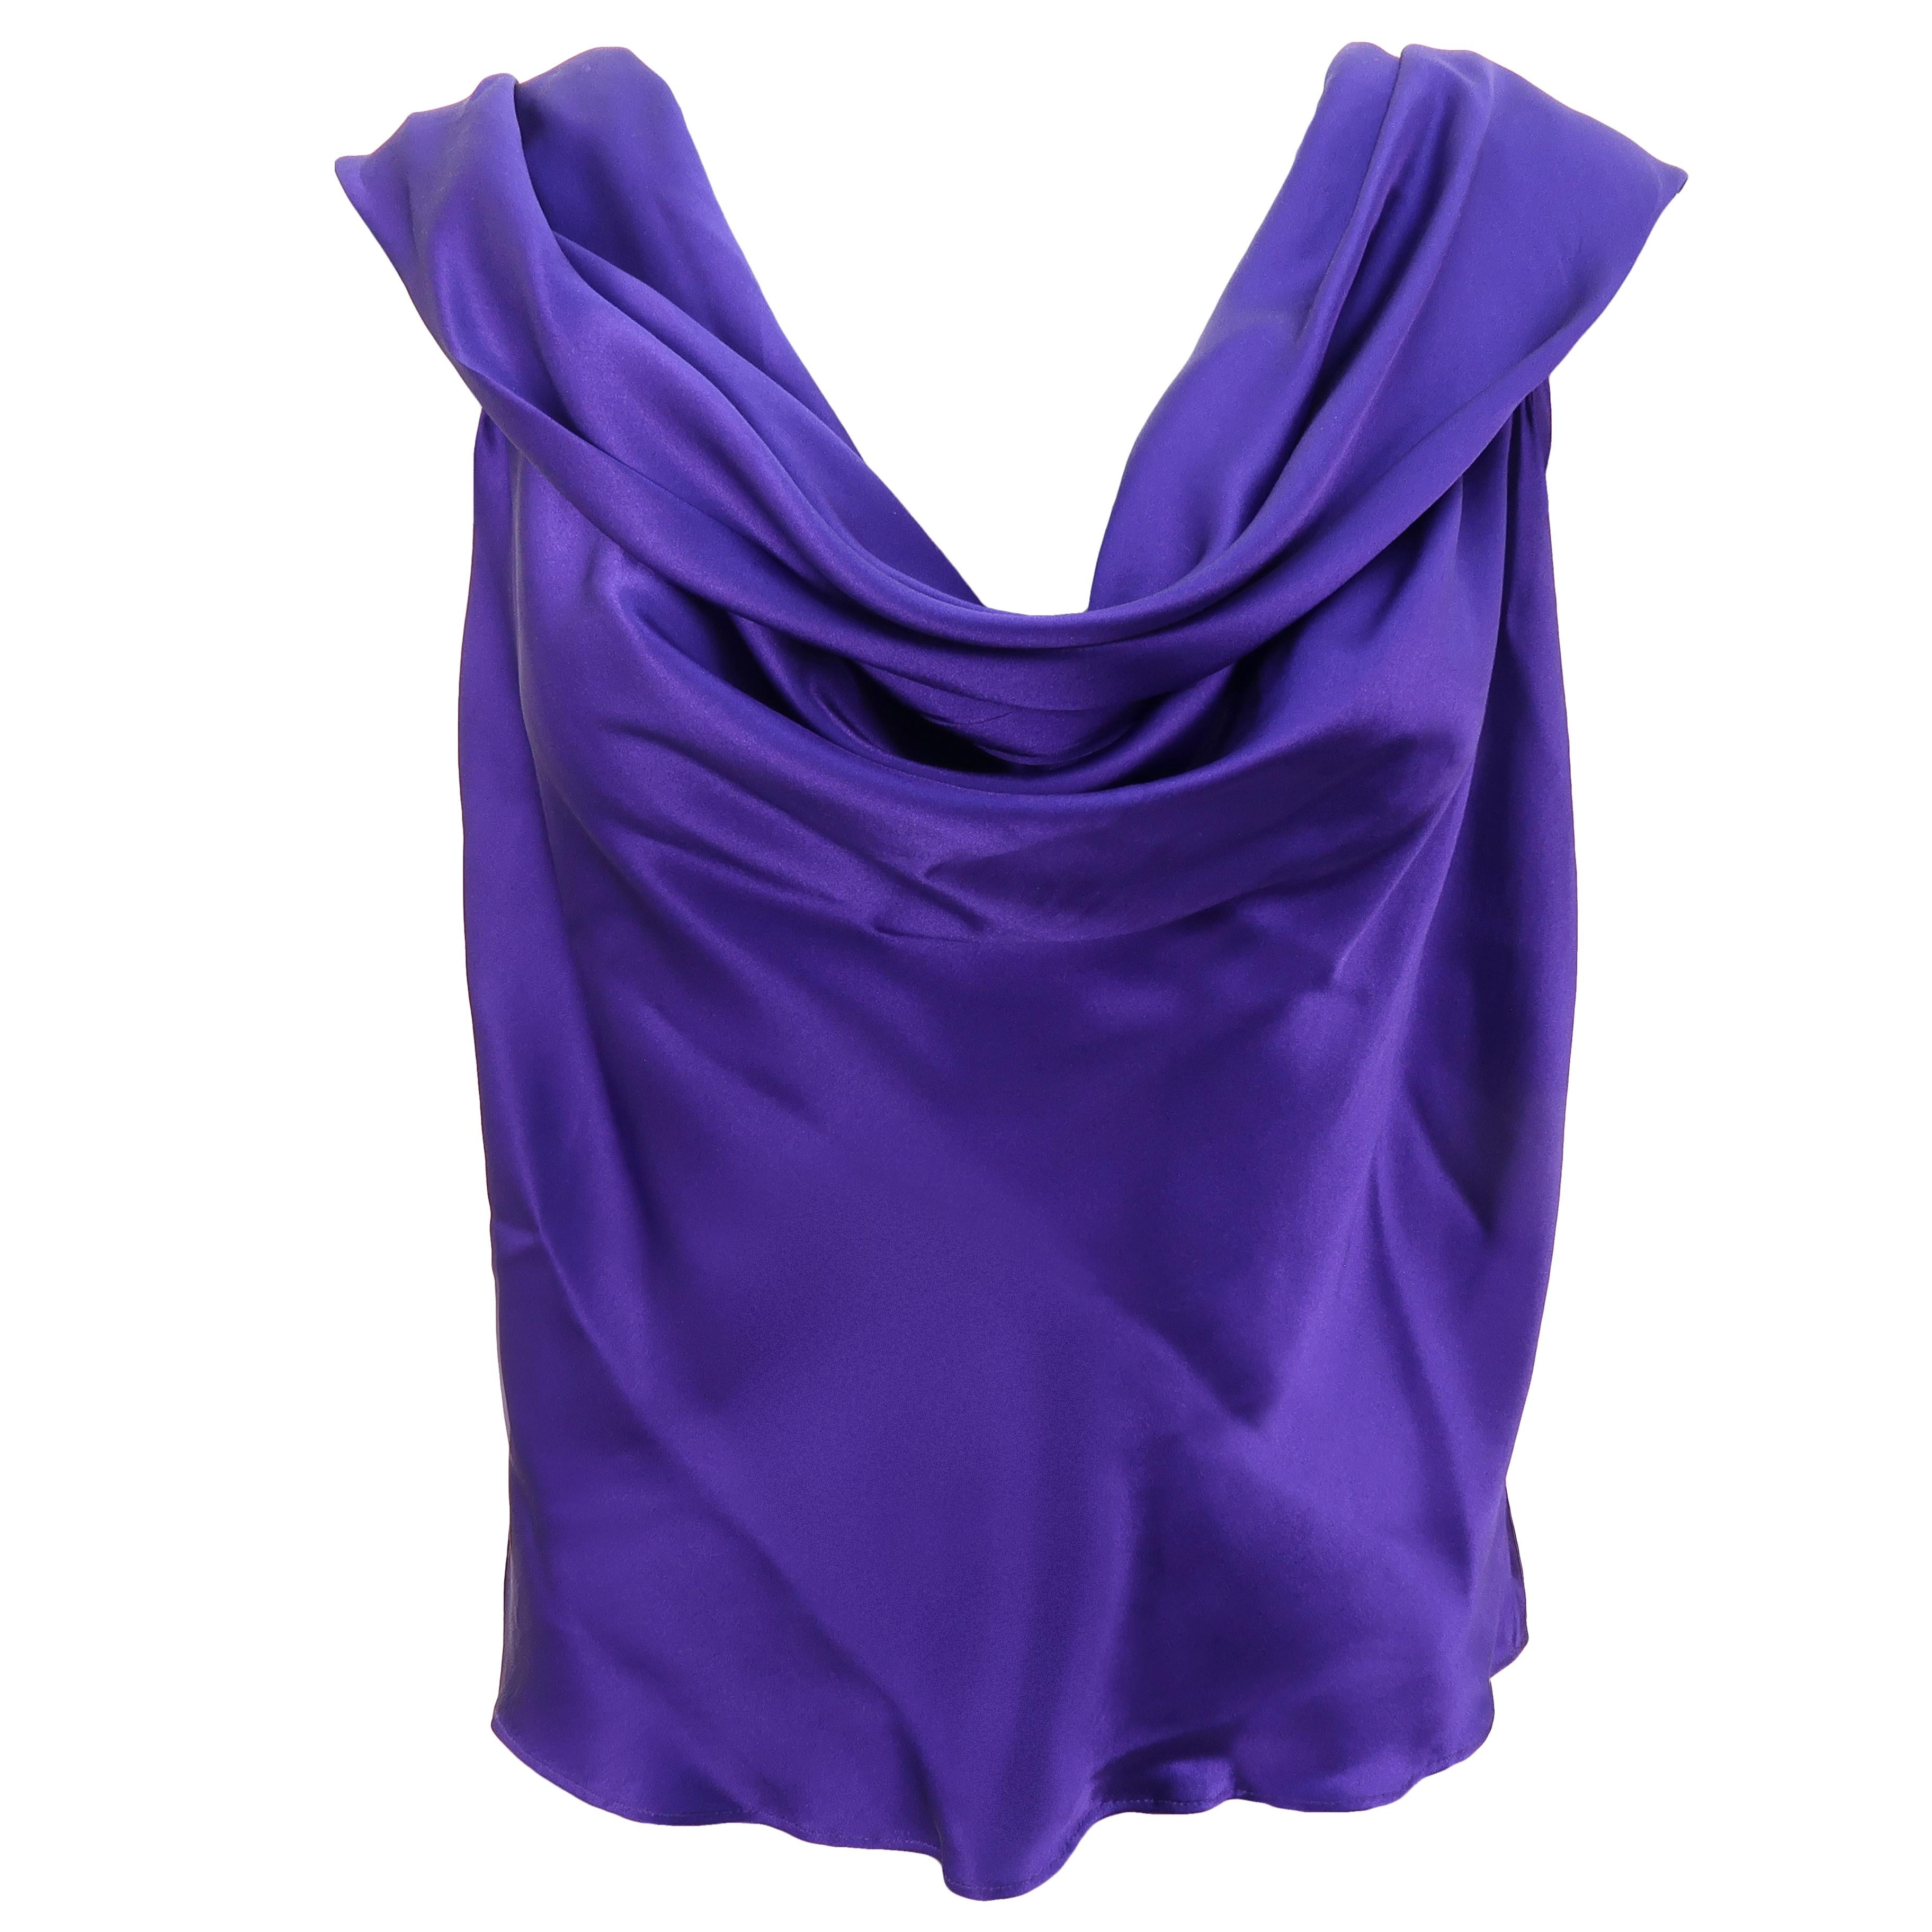 Another illustration of Gaultier’s technical skills when it comes to ‘flou’ territory, the opposite of all things tailored and constructed, this sensually cross draped silk top is luxurious and feminine, done in a subtle shade of lavender blue silk.